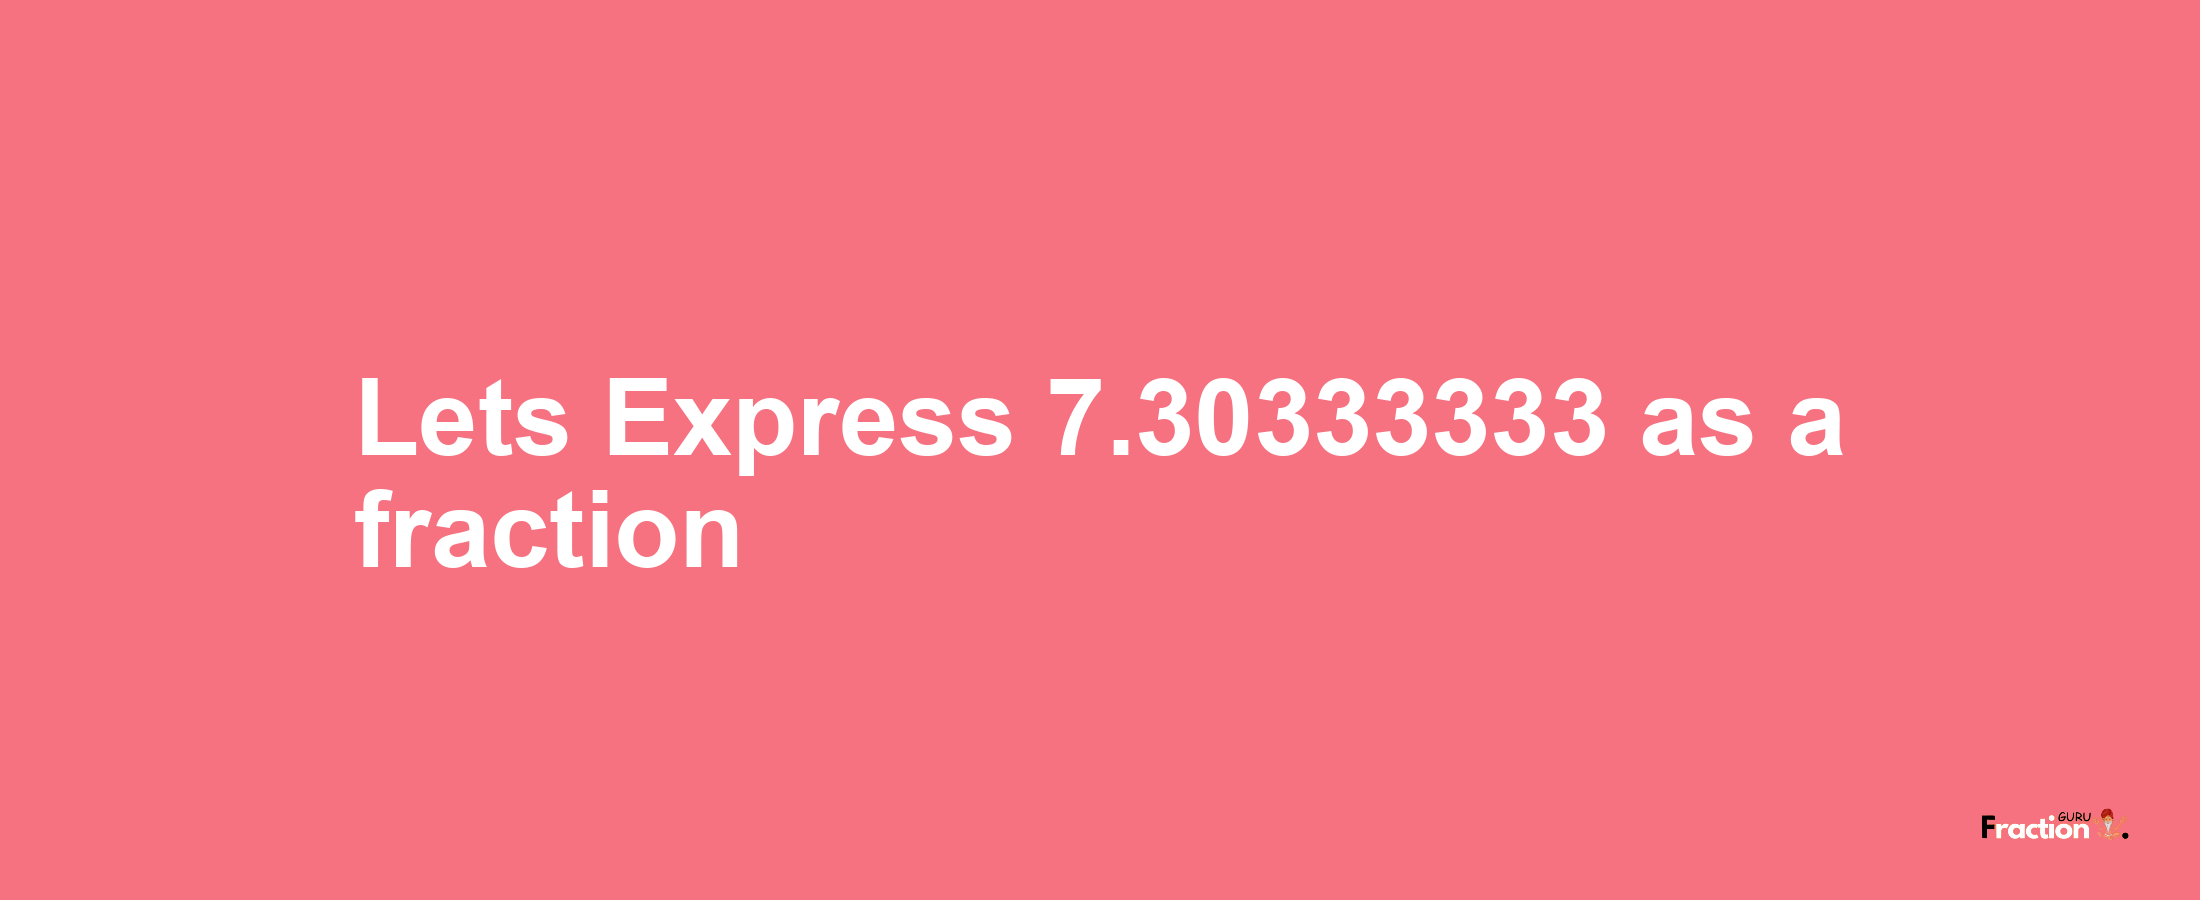 Lets Express 7.30333333 as afraction